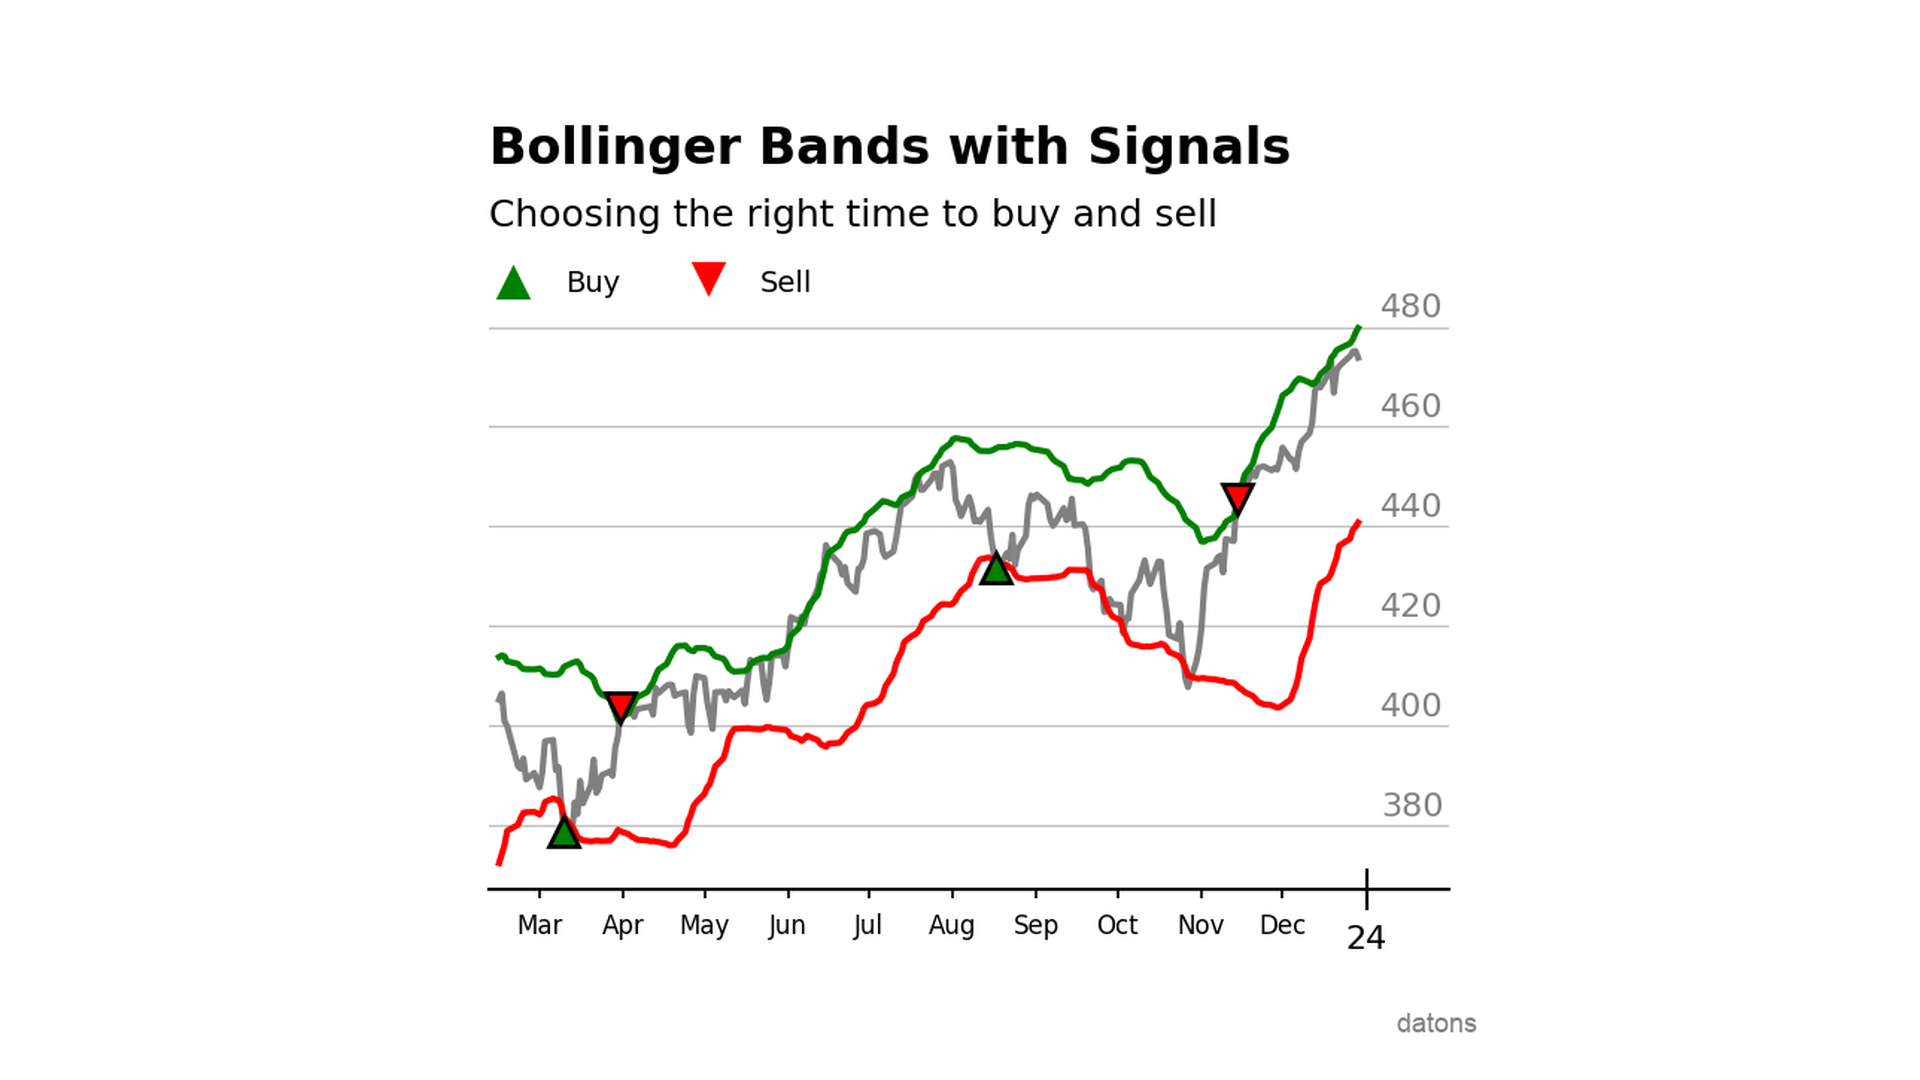 Trading strategy using Bollinger Bands with highlighted buy and sell signals